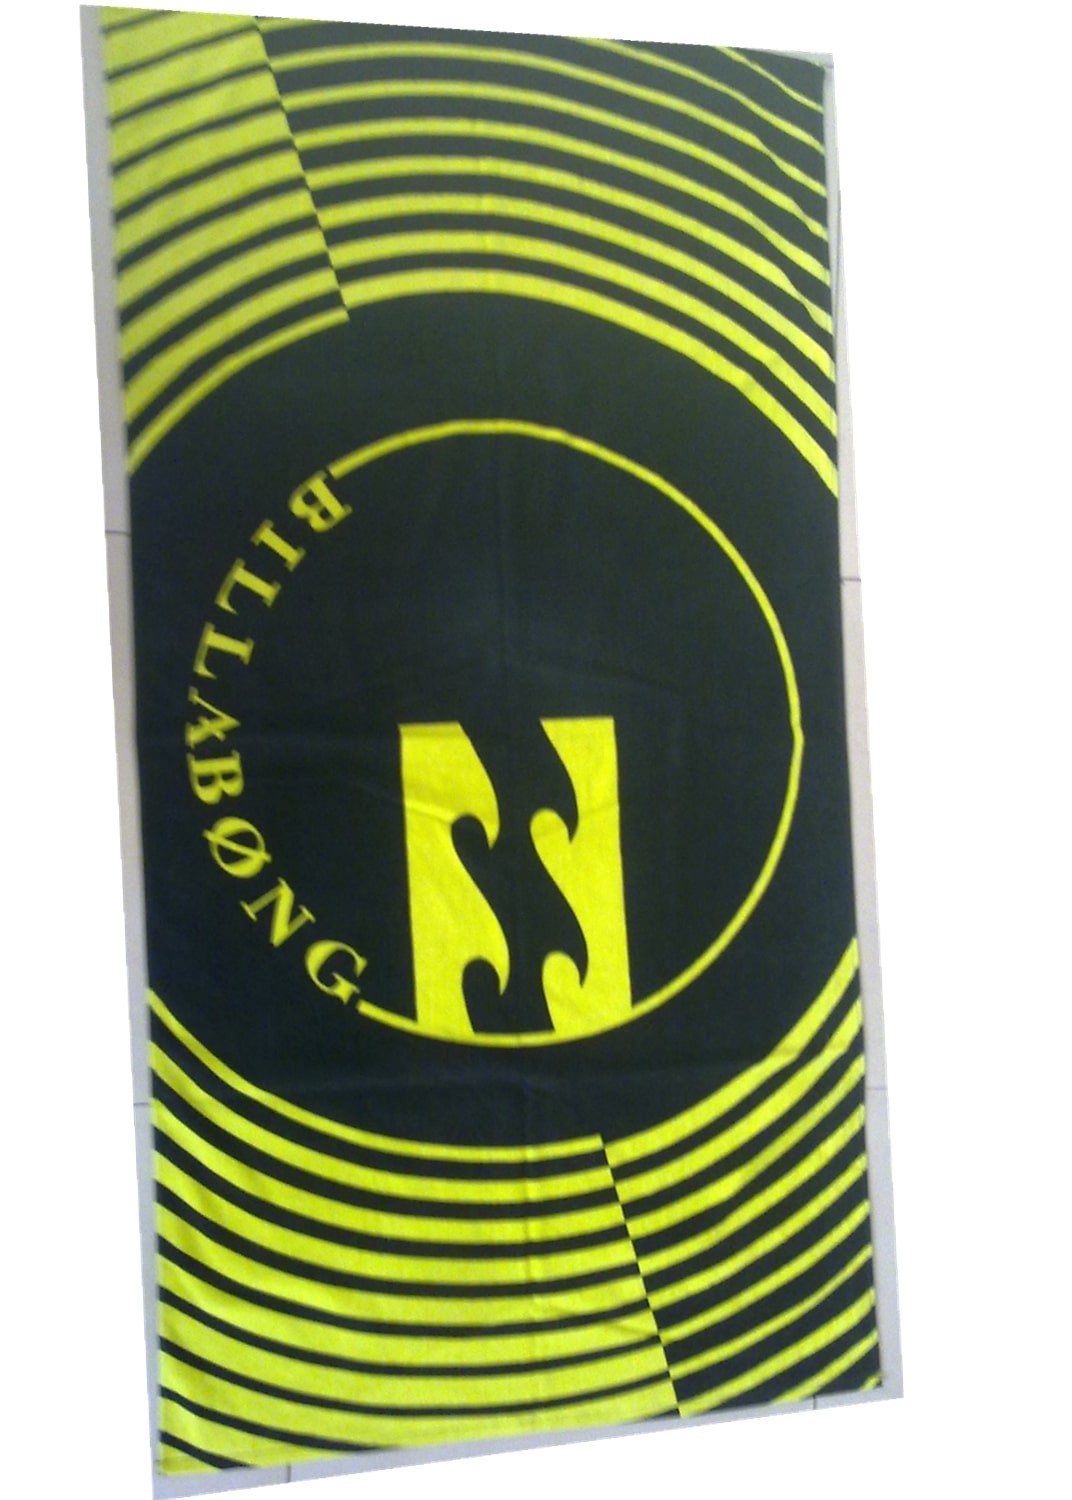 Customized and personalized promotional beach towels